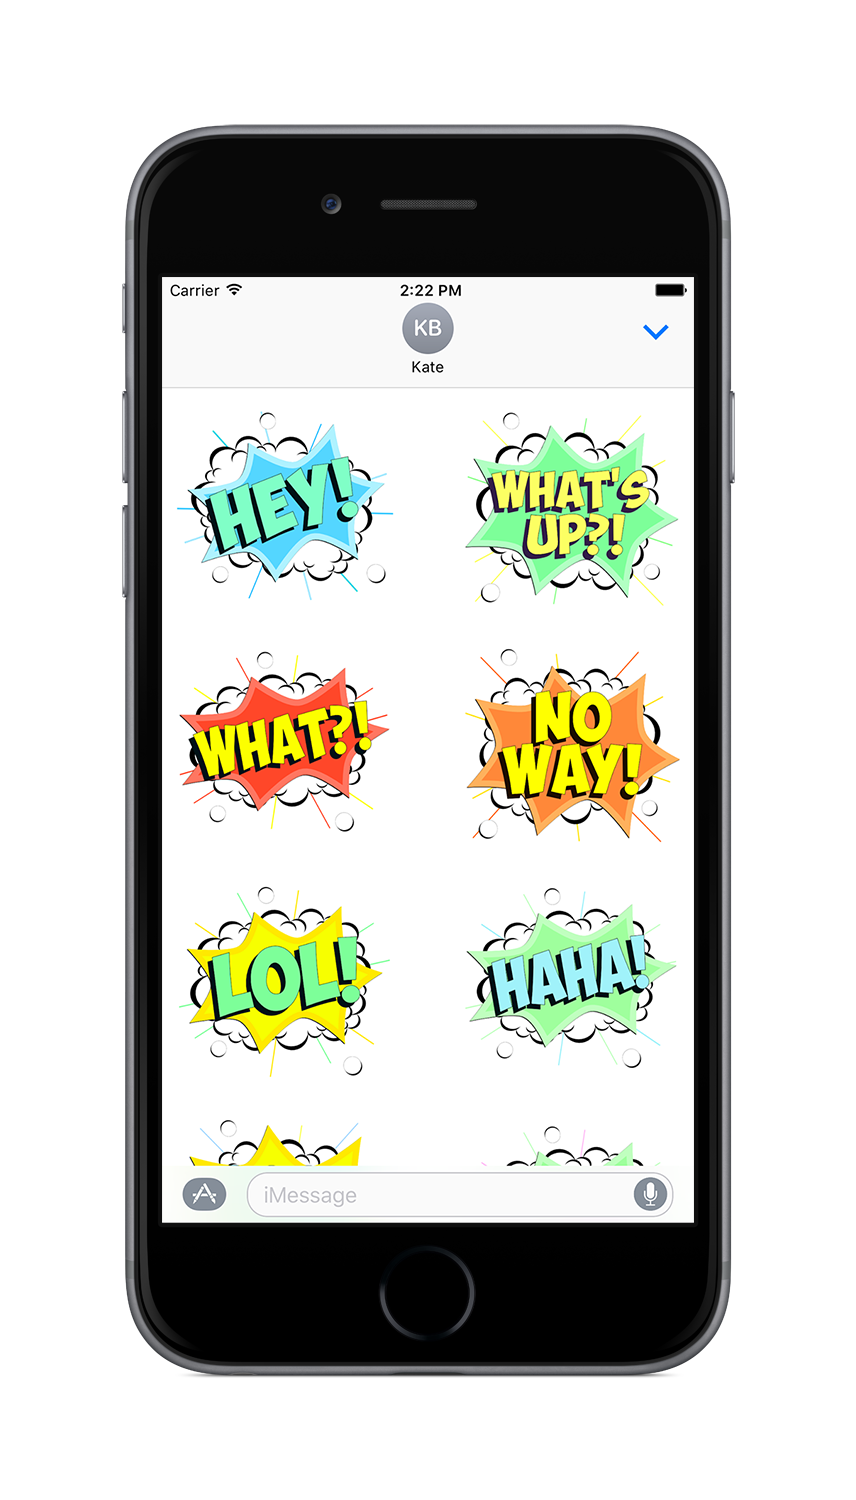 Shout! Stickers for iMessage